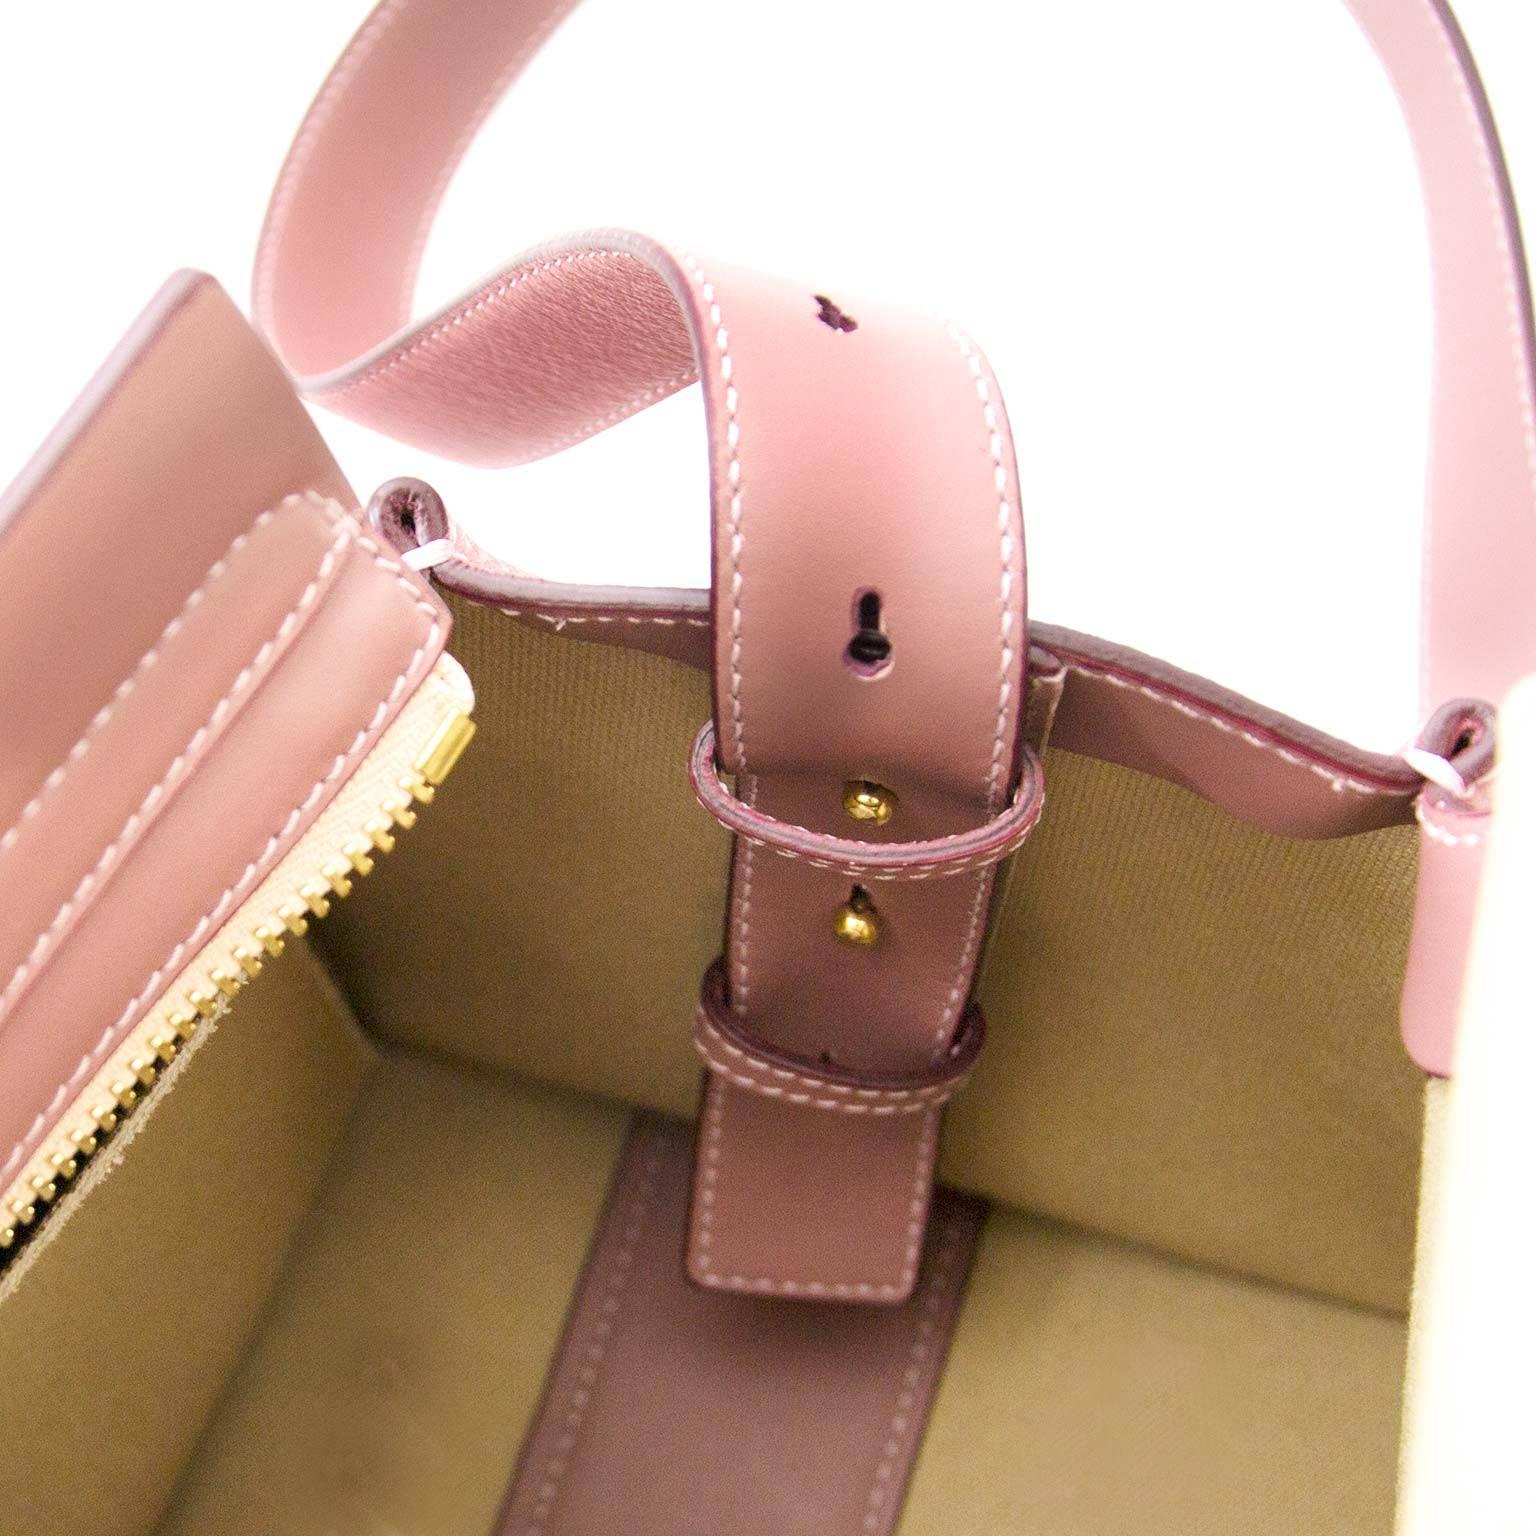 Chloe Pink Leather Cate Zipper Satchel Bag  In Excellent Condition For Sale In Antwerp, BE